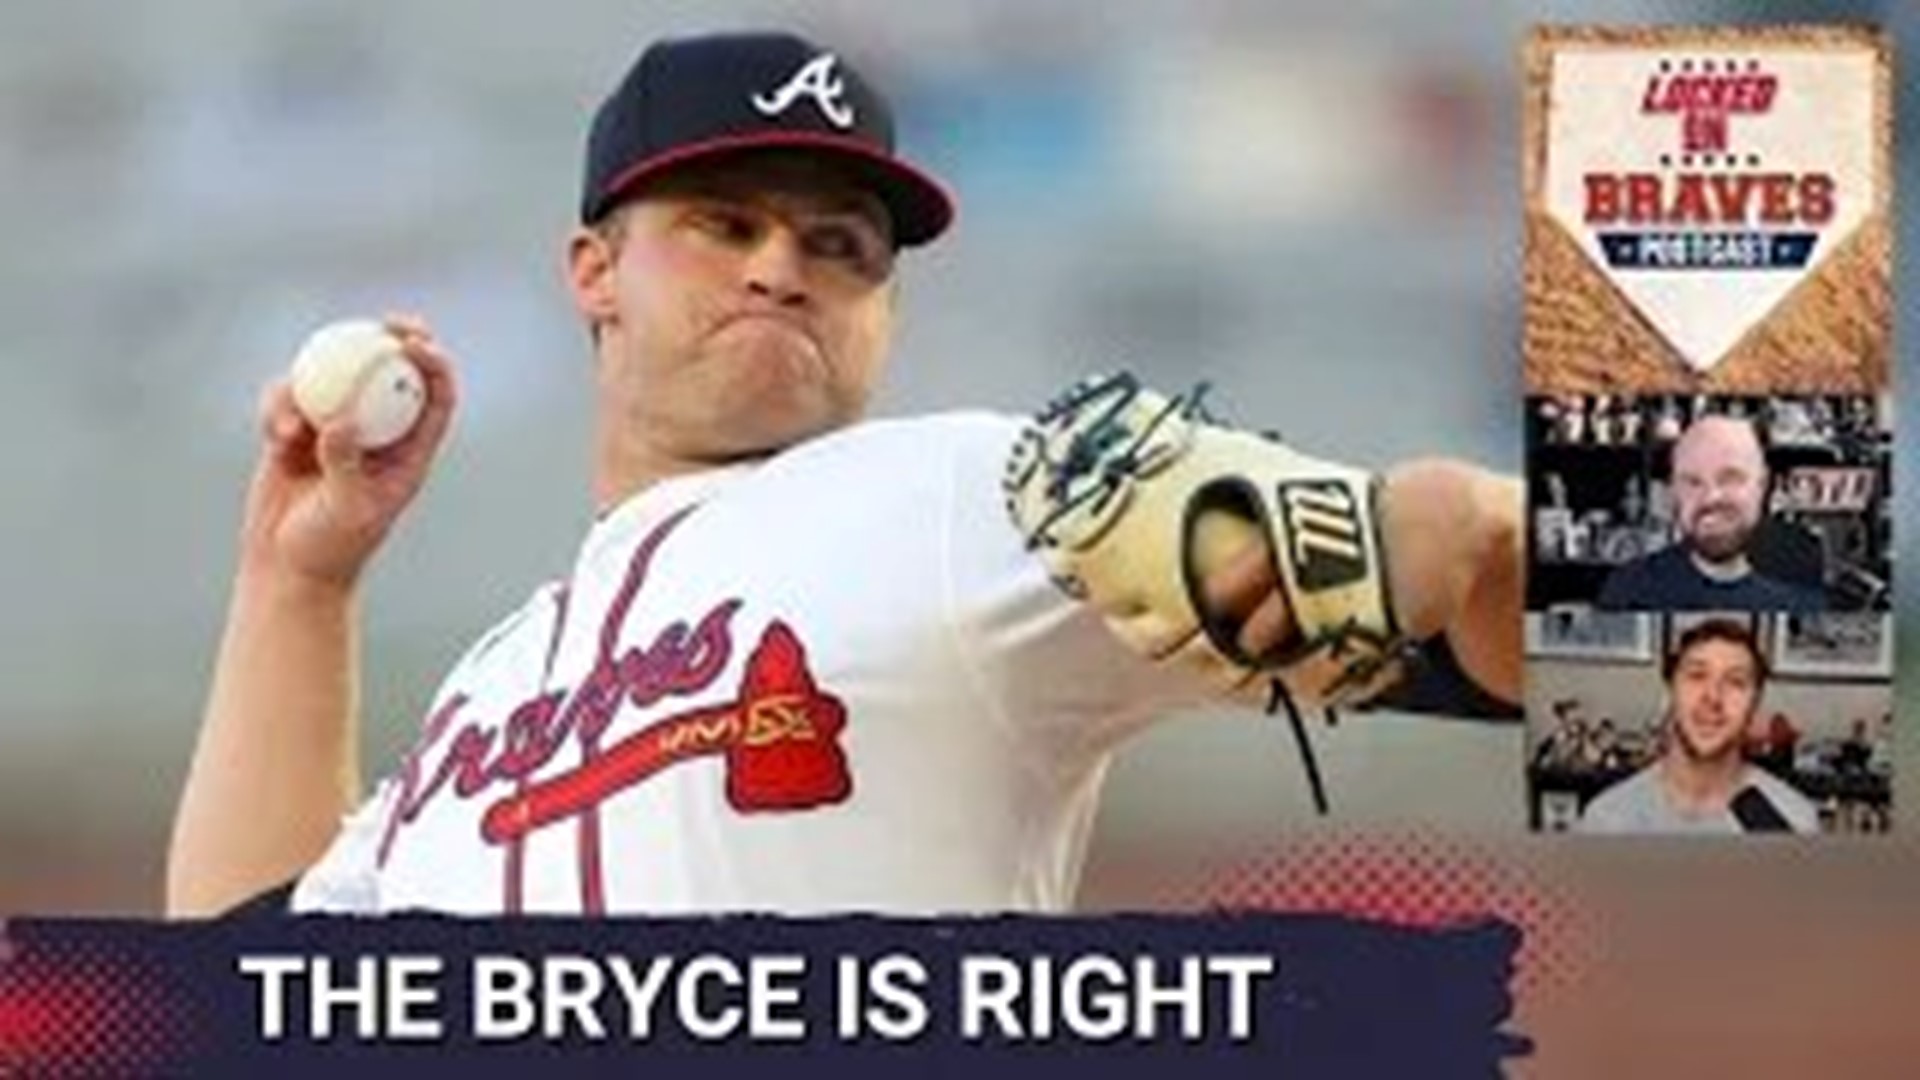 Making his season debut, Bryce Elder worked into the seventh inning and Travis d'Arnaud launched yet another home run as the Atlanta Braves beat the Miami Marlins.